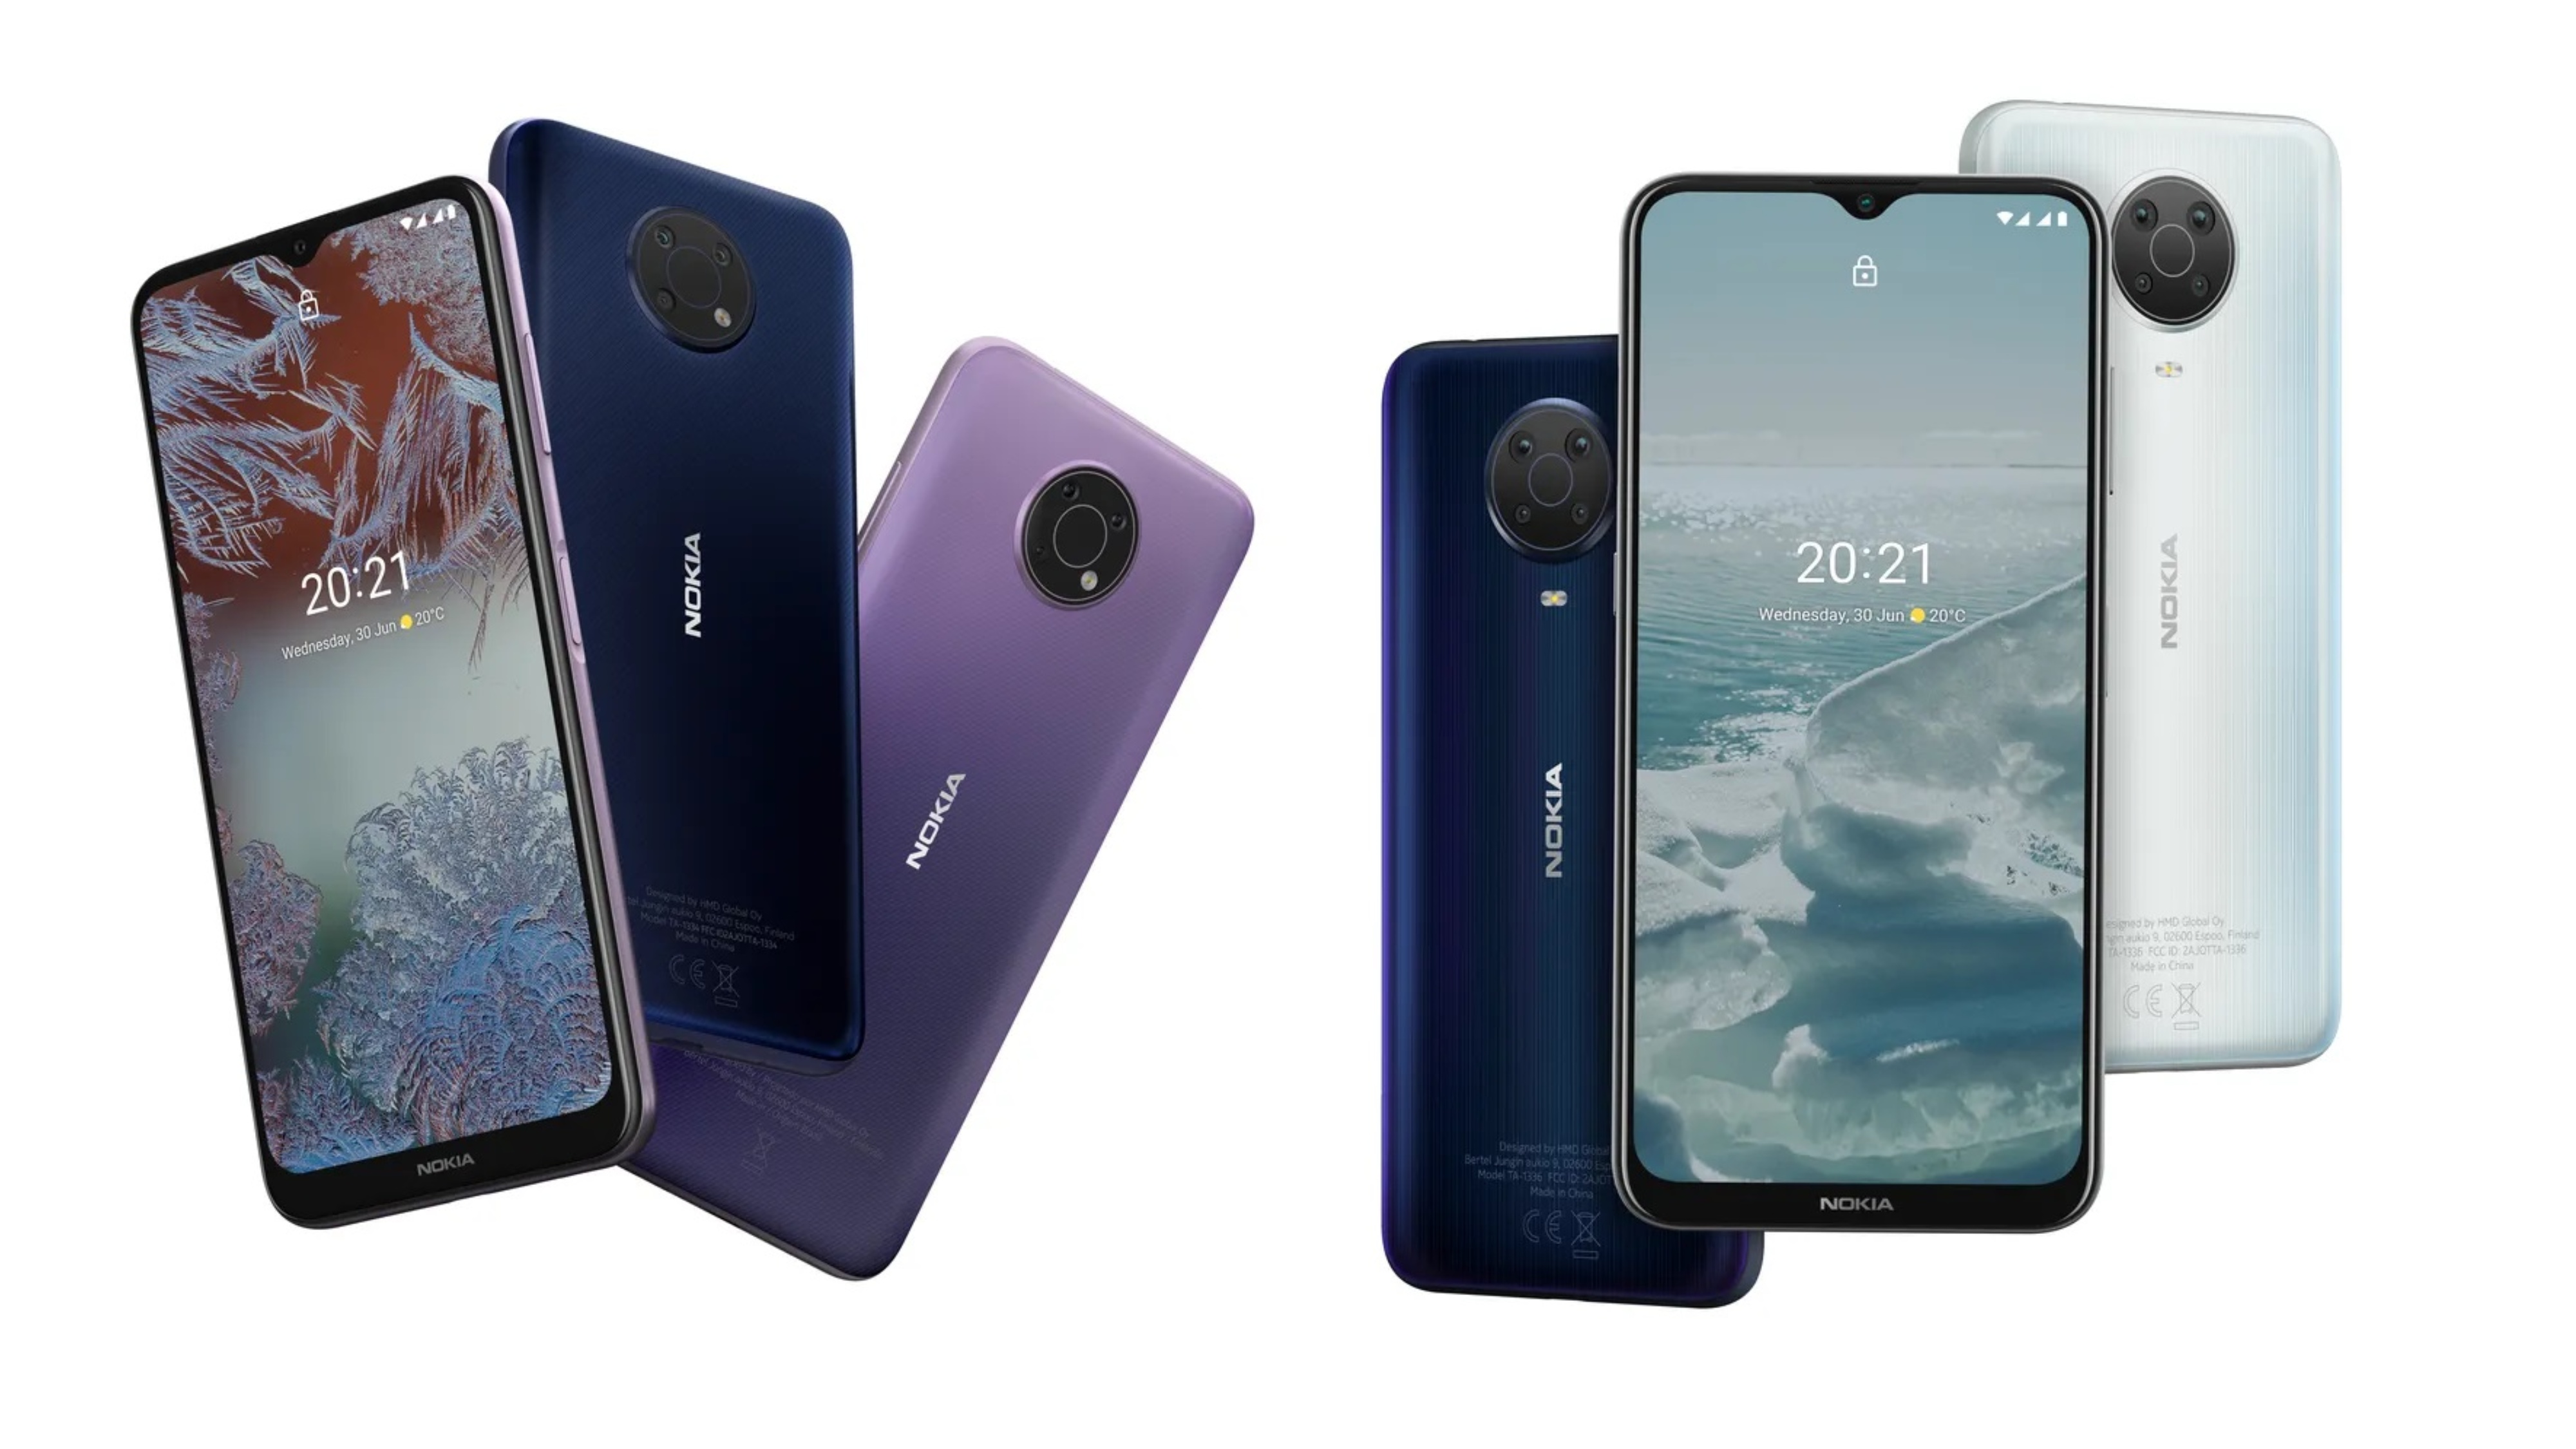 Nokia G10, G20 budget smartphones unveiled with HD+ display, 5,050mAh battery, & more - Gizmochina